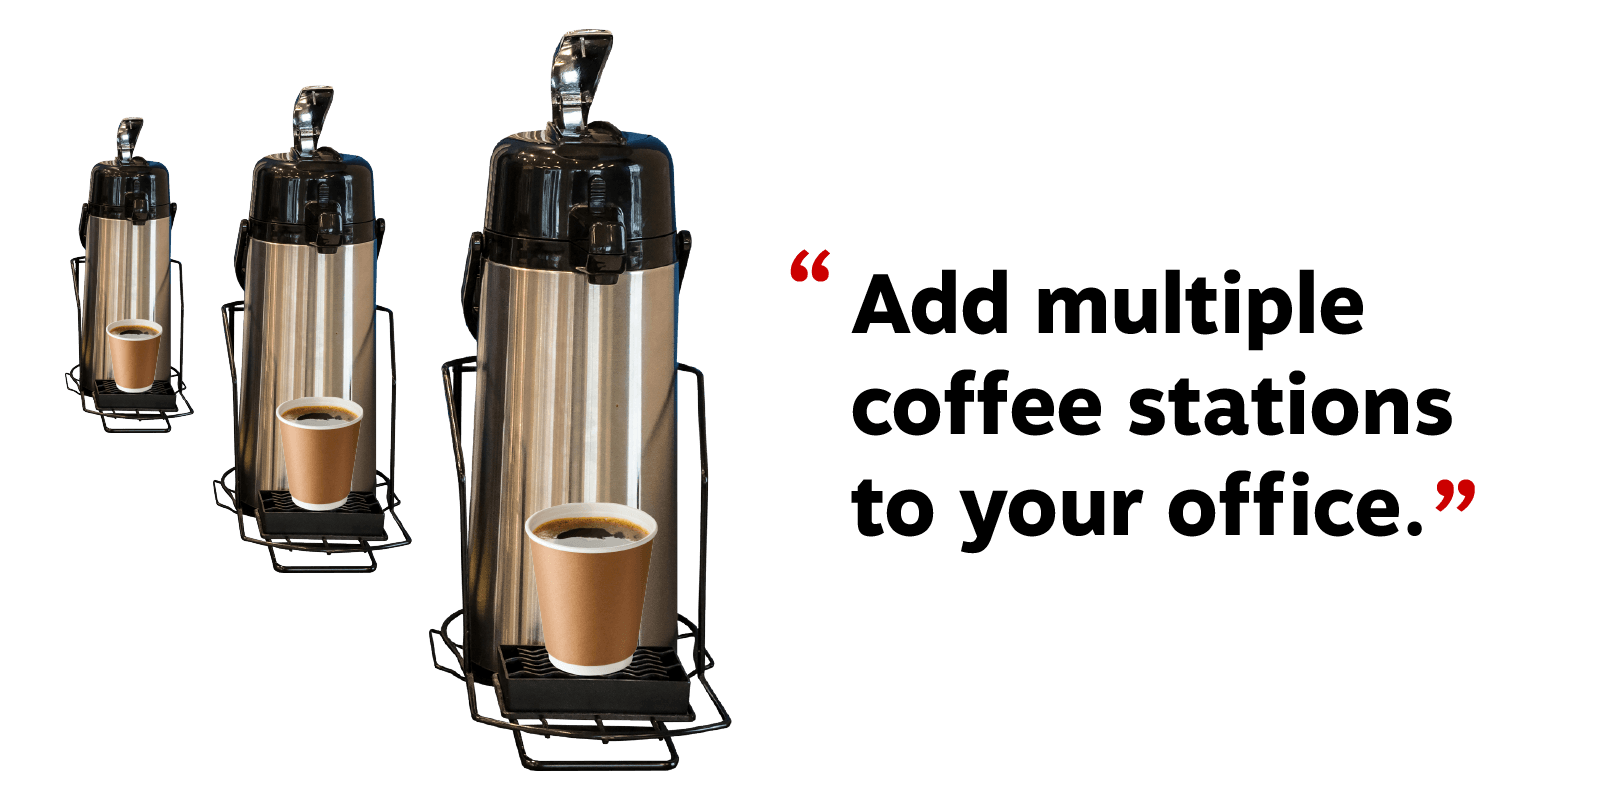 Coffee Airpot and Condiment Station